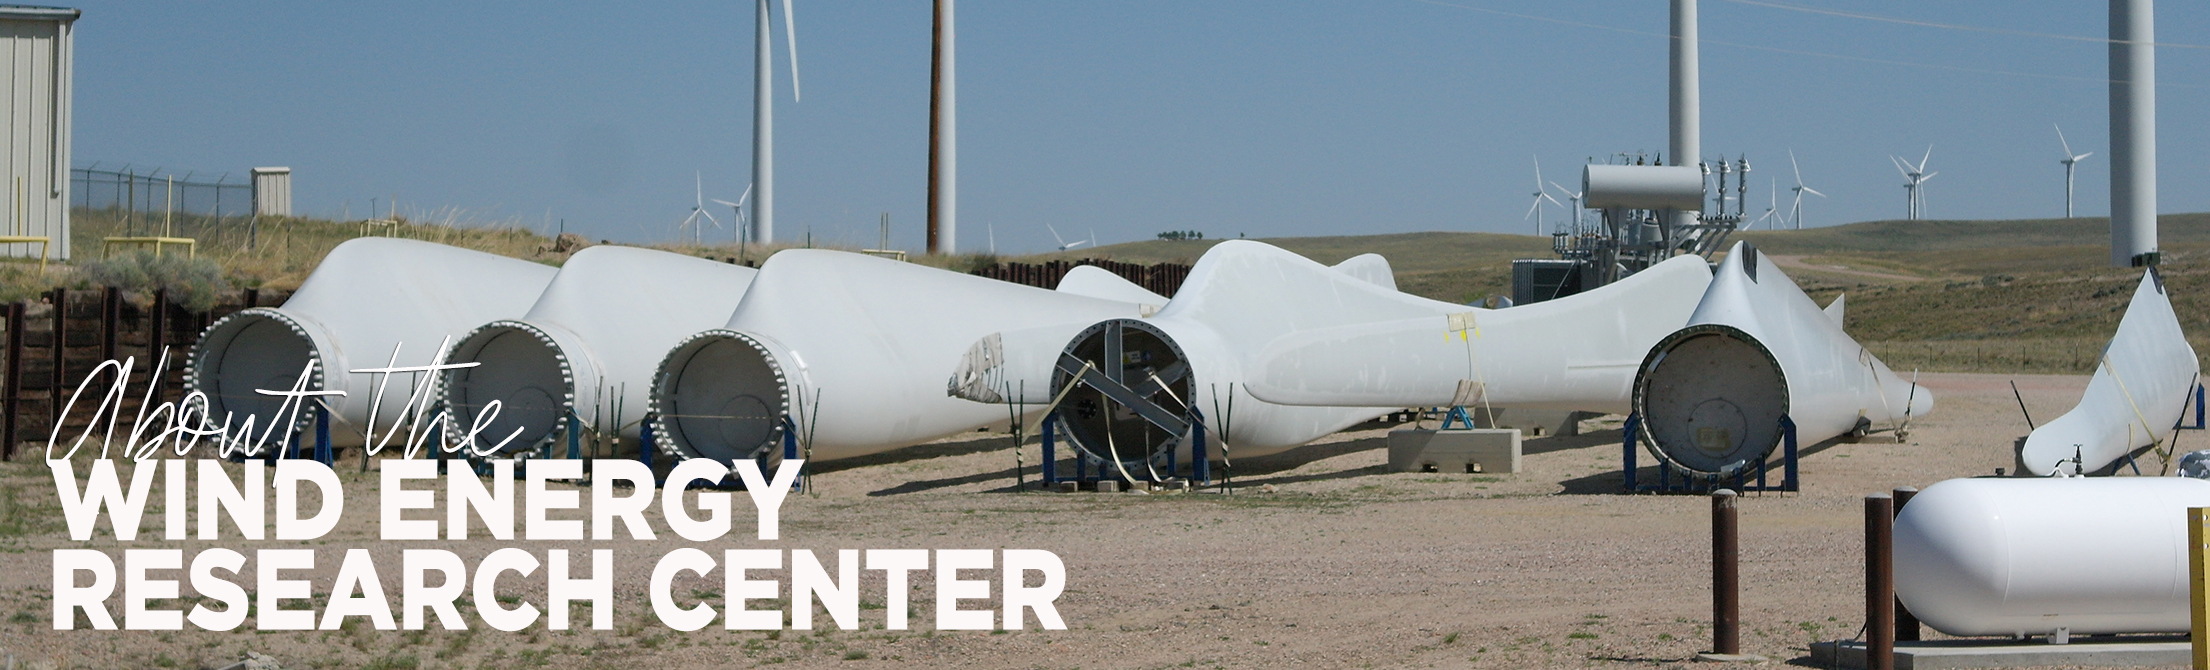 About the Wind Energy Research Center